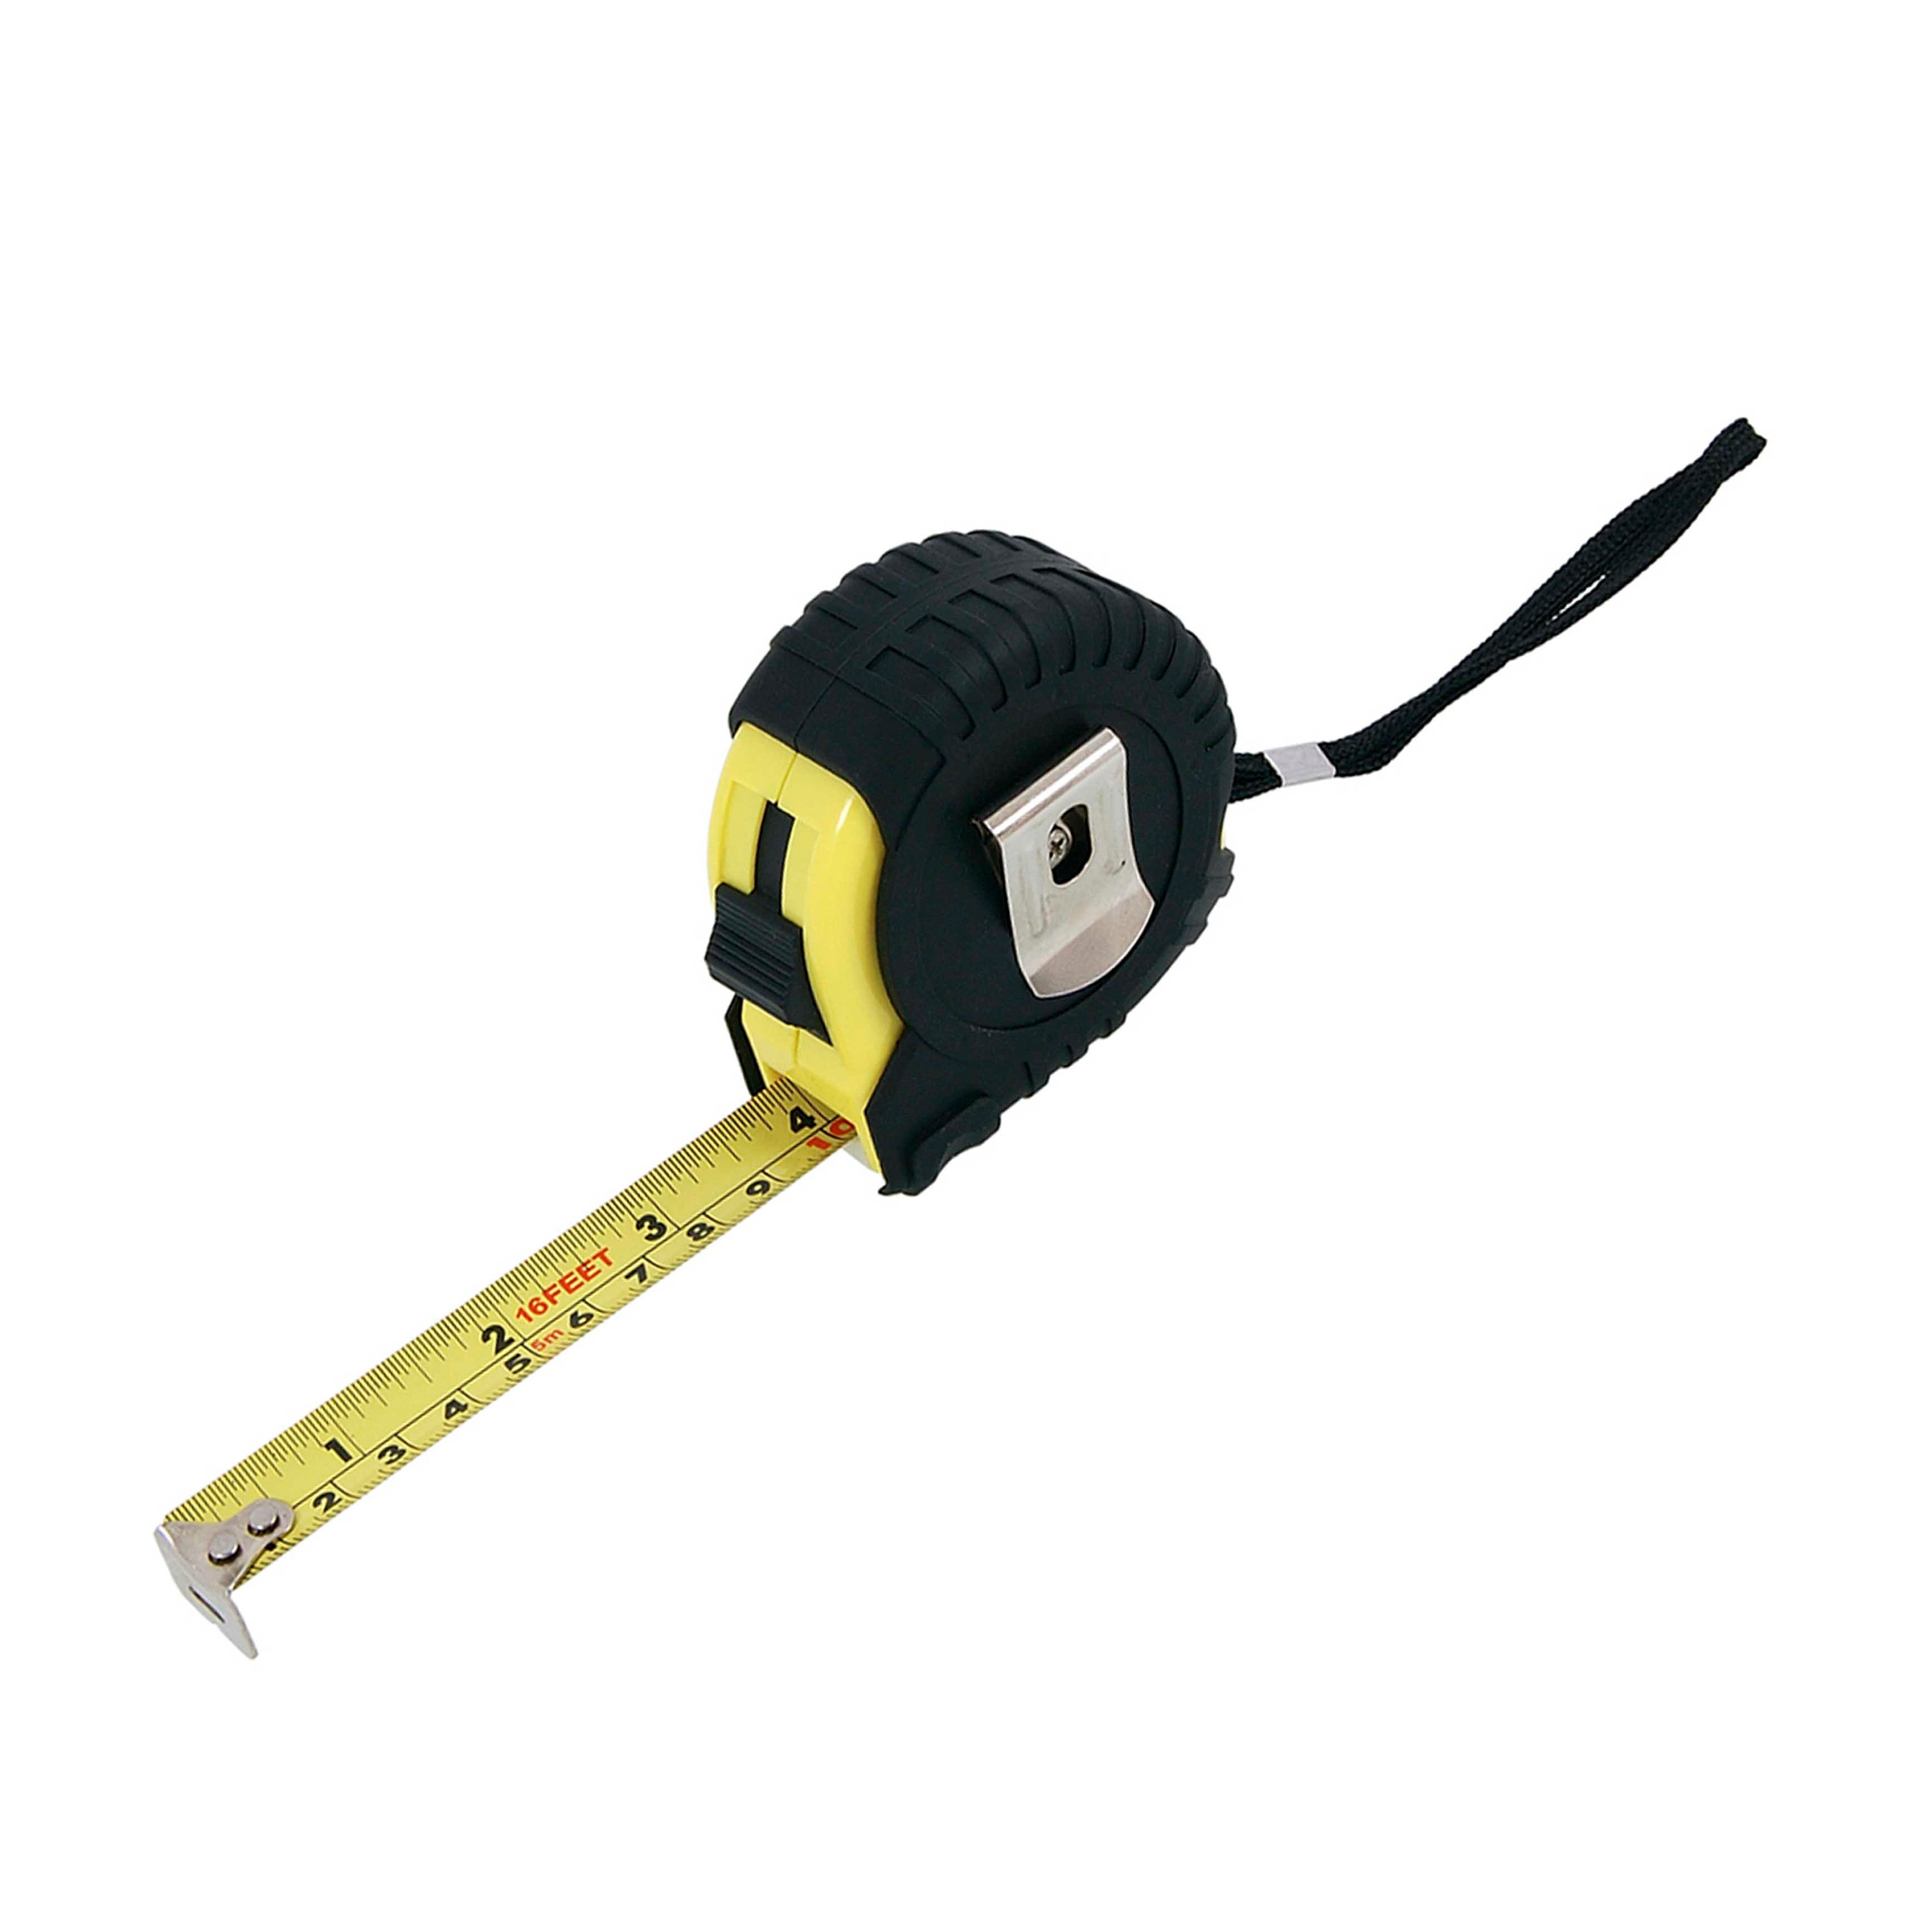 1/2/3/4pcs 2m Mini Soft Tape Measure With Double-Sided Scale